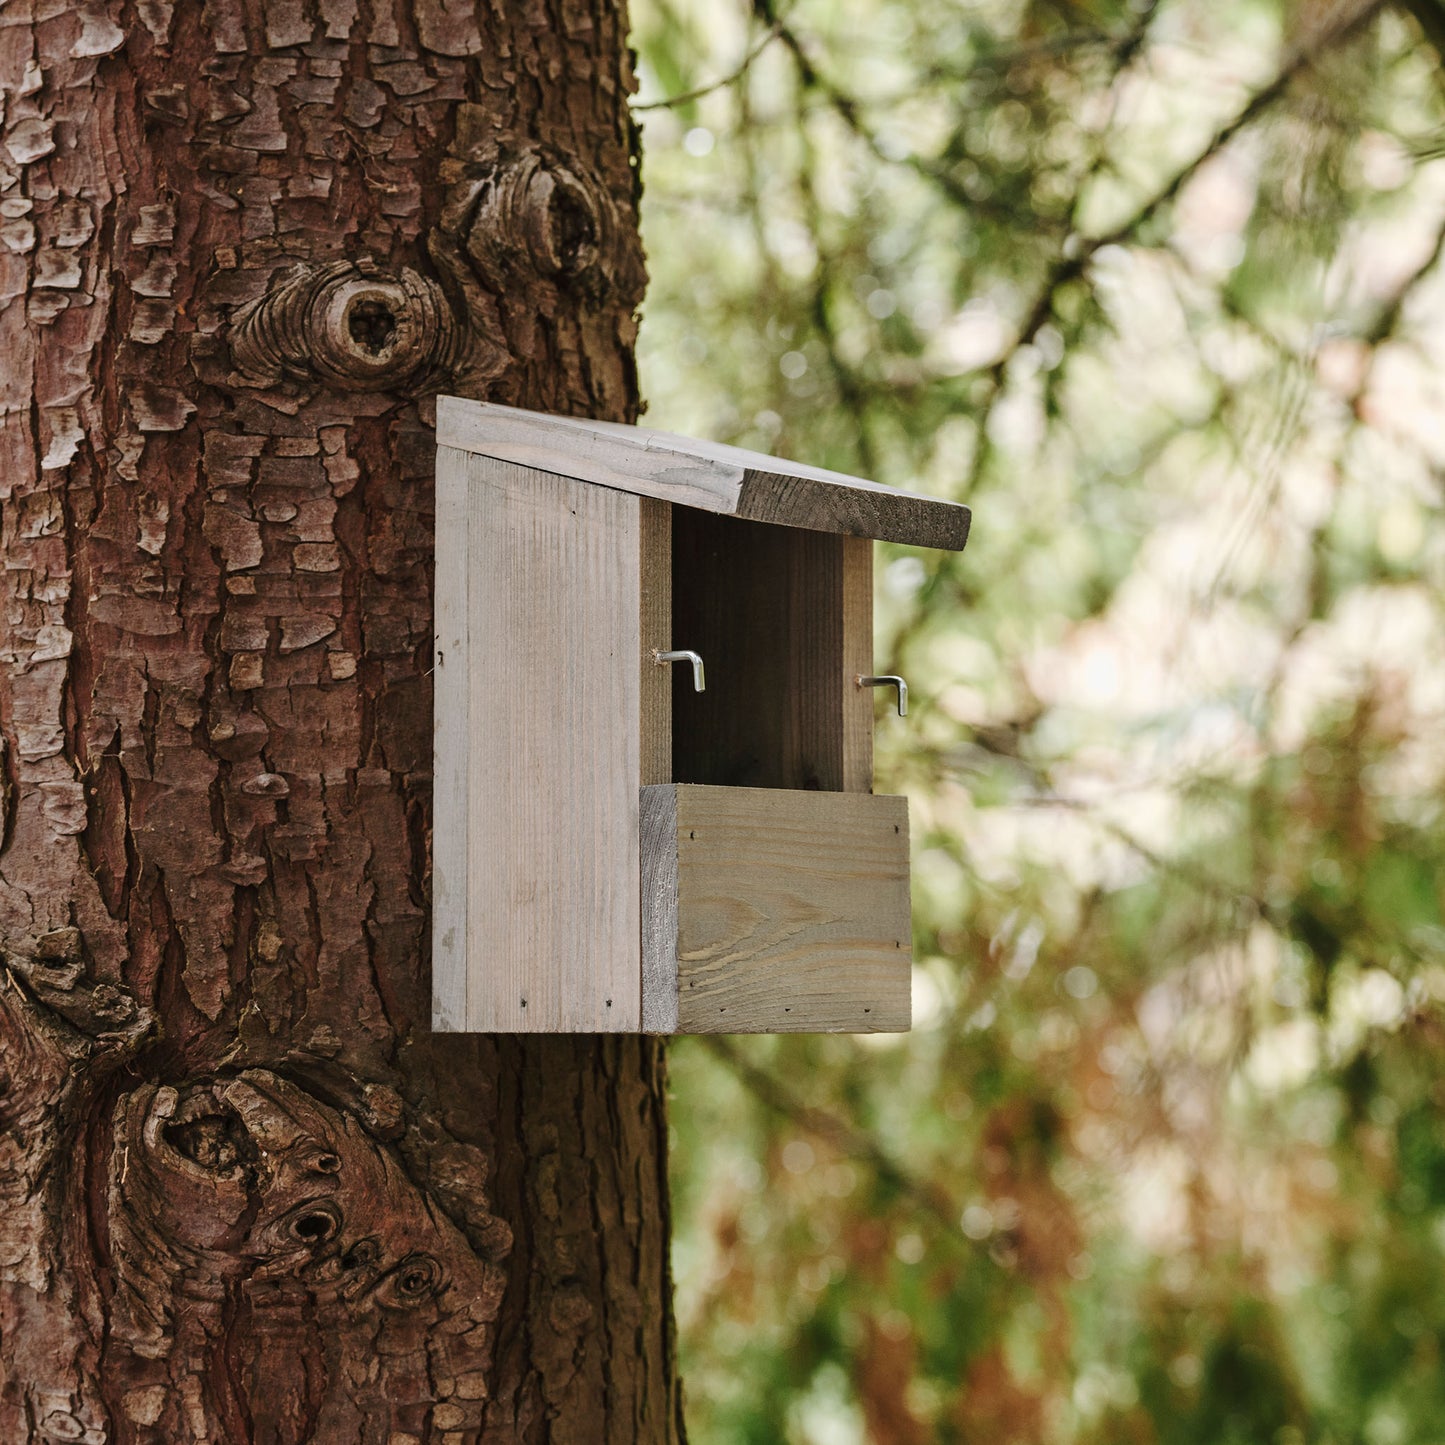 Peckish Everyday Nest Box hanging on tree with front removed